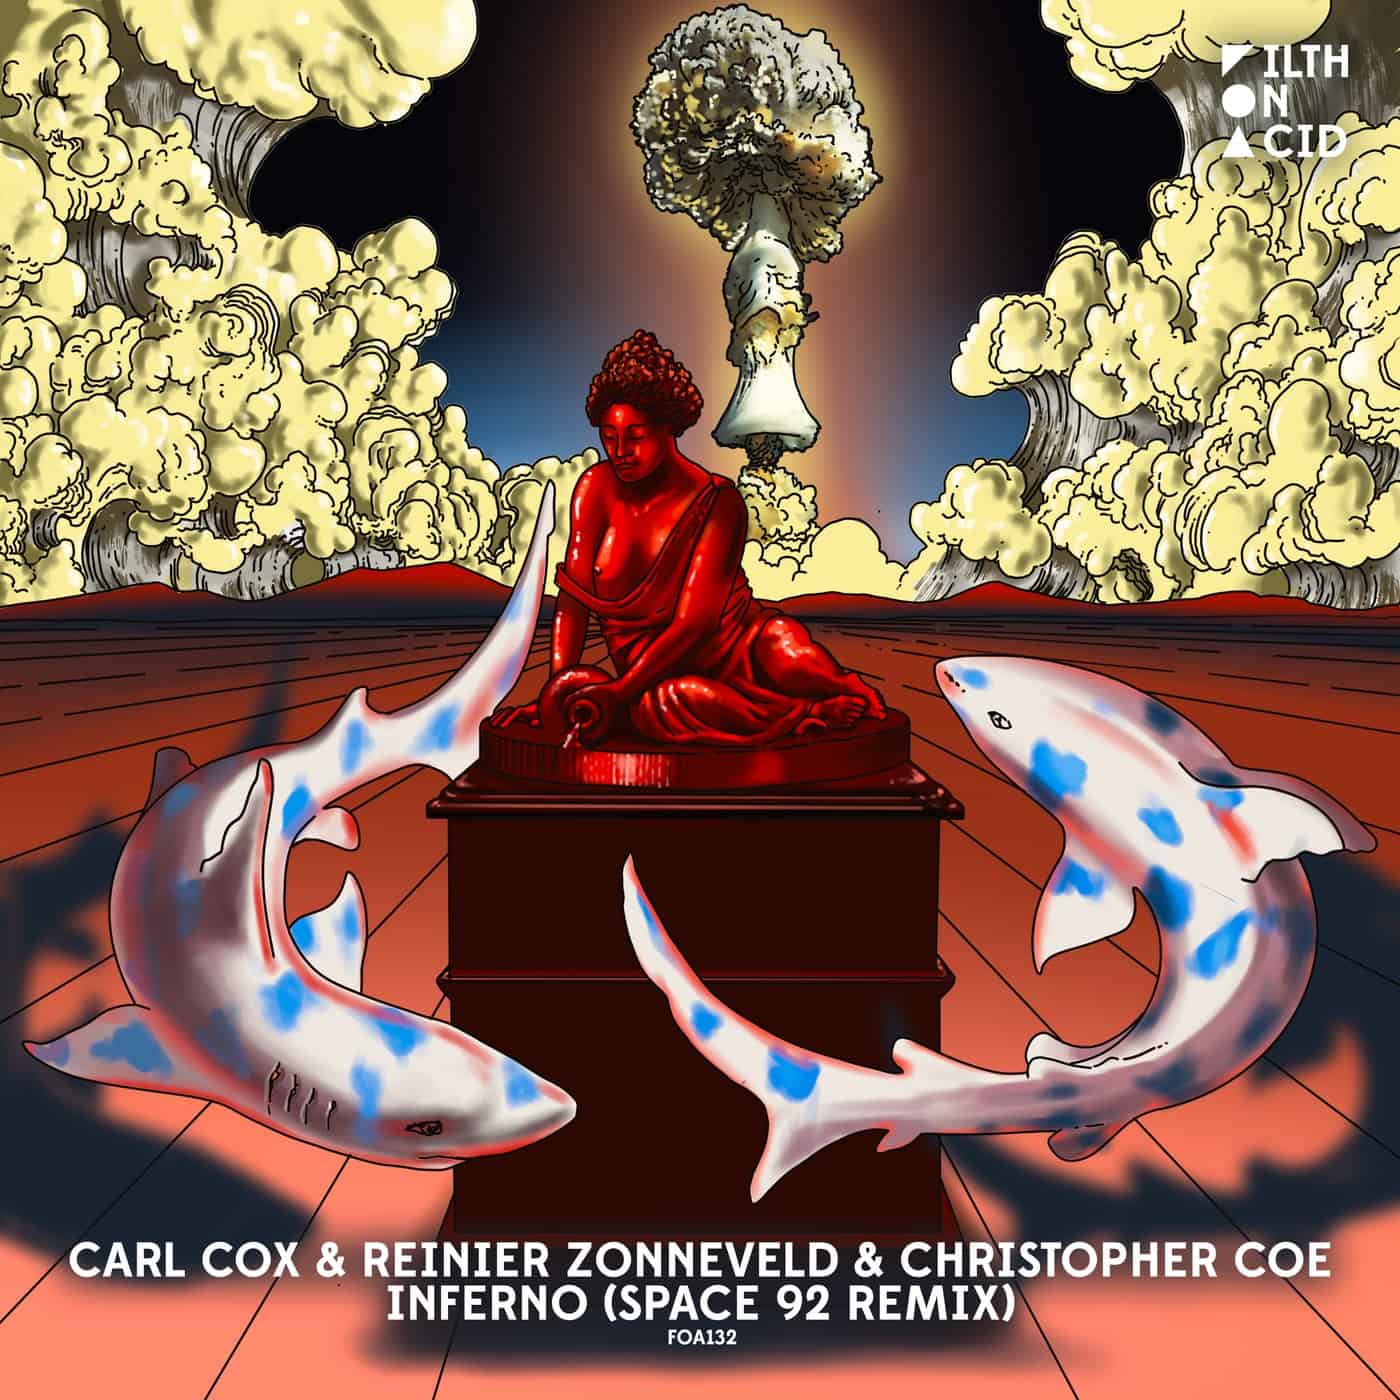 image cover: Carl Cox, Reinier Zonneveld, Christopher Coe - Inferno (Space 92 Remix) / FOA132